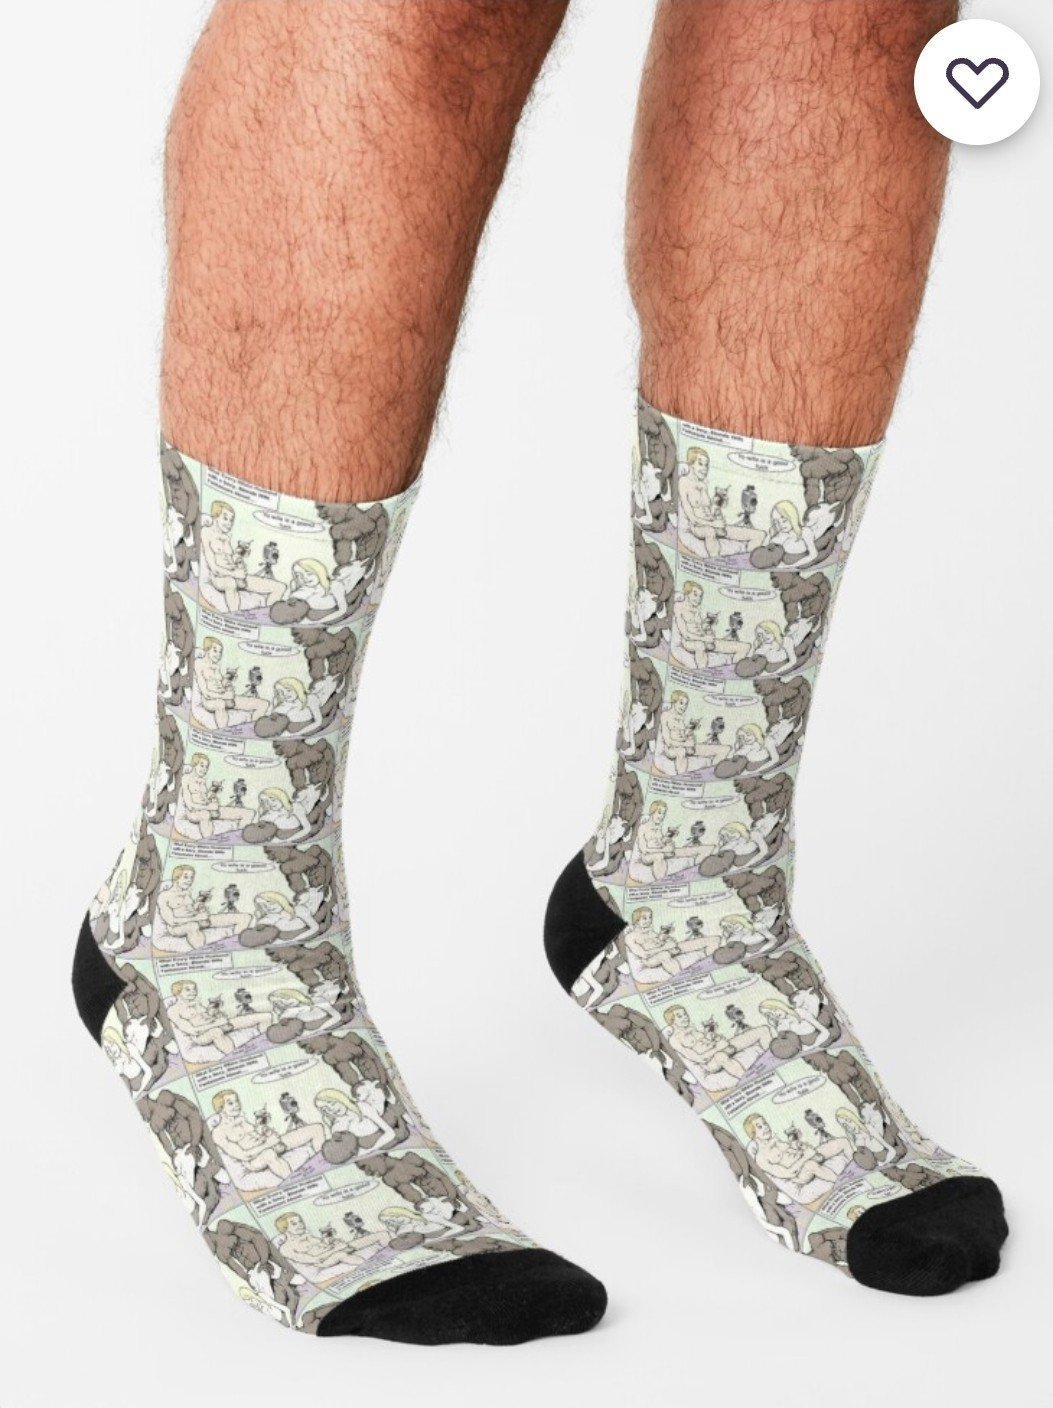 Watch the Photo by Niftywizard with the username @Niftywizard, who is a verified user, posted on October 8, 2023 and the text says 'Hotwife socks
Adult hotwife socks https://www.redbubble.com/shop/ap/153354921?asc=u'